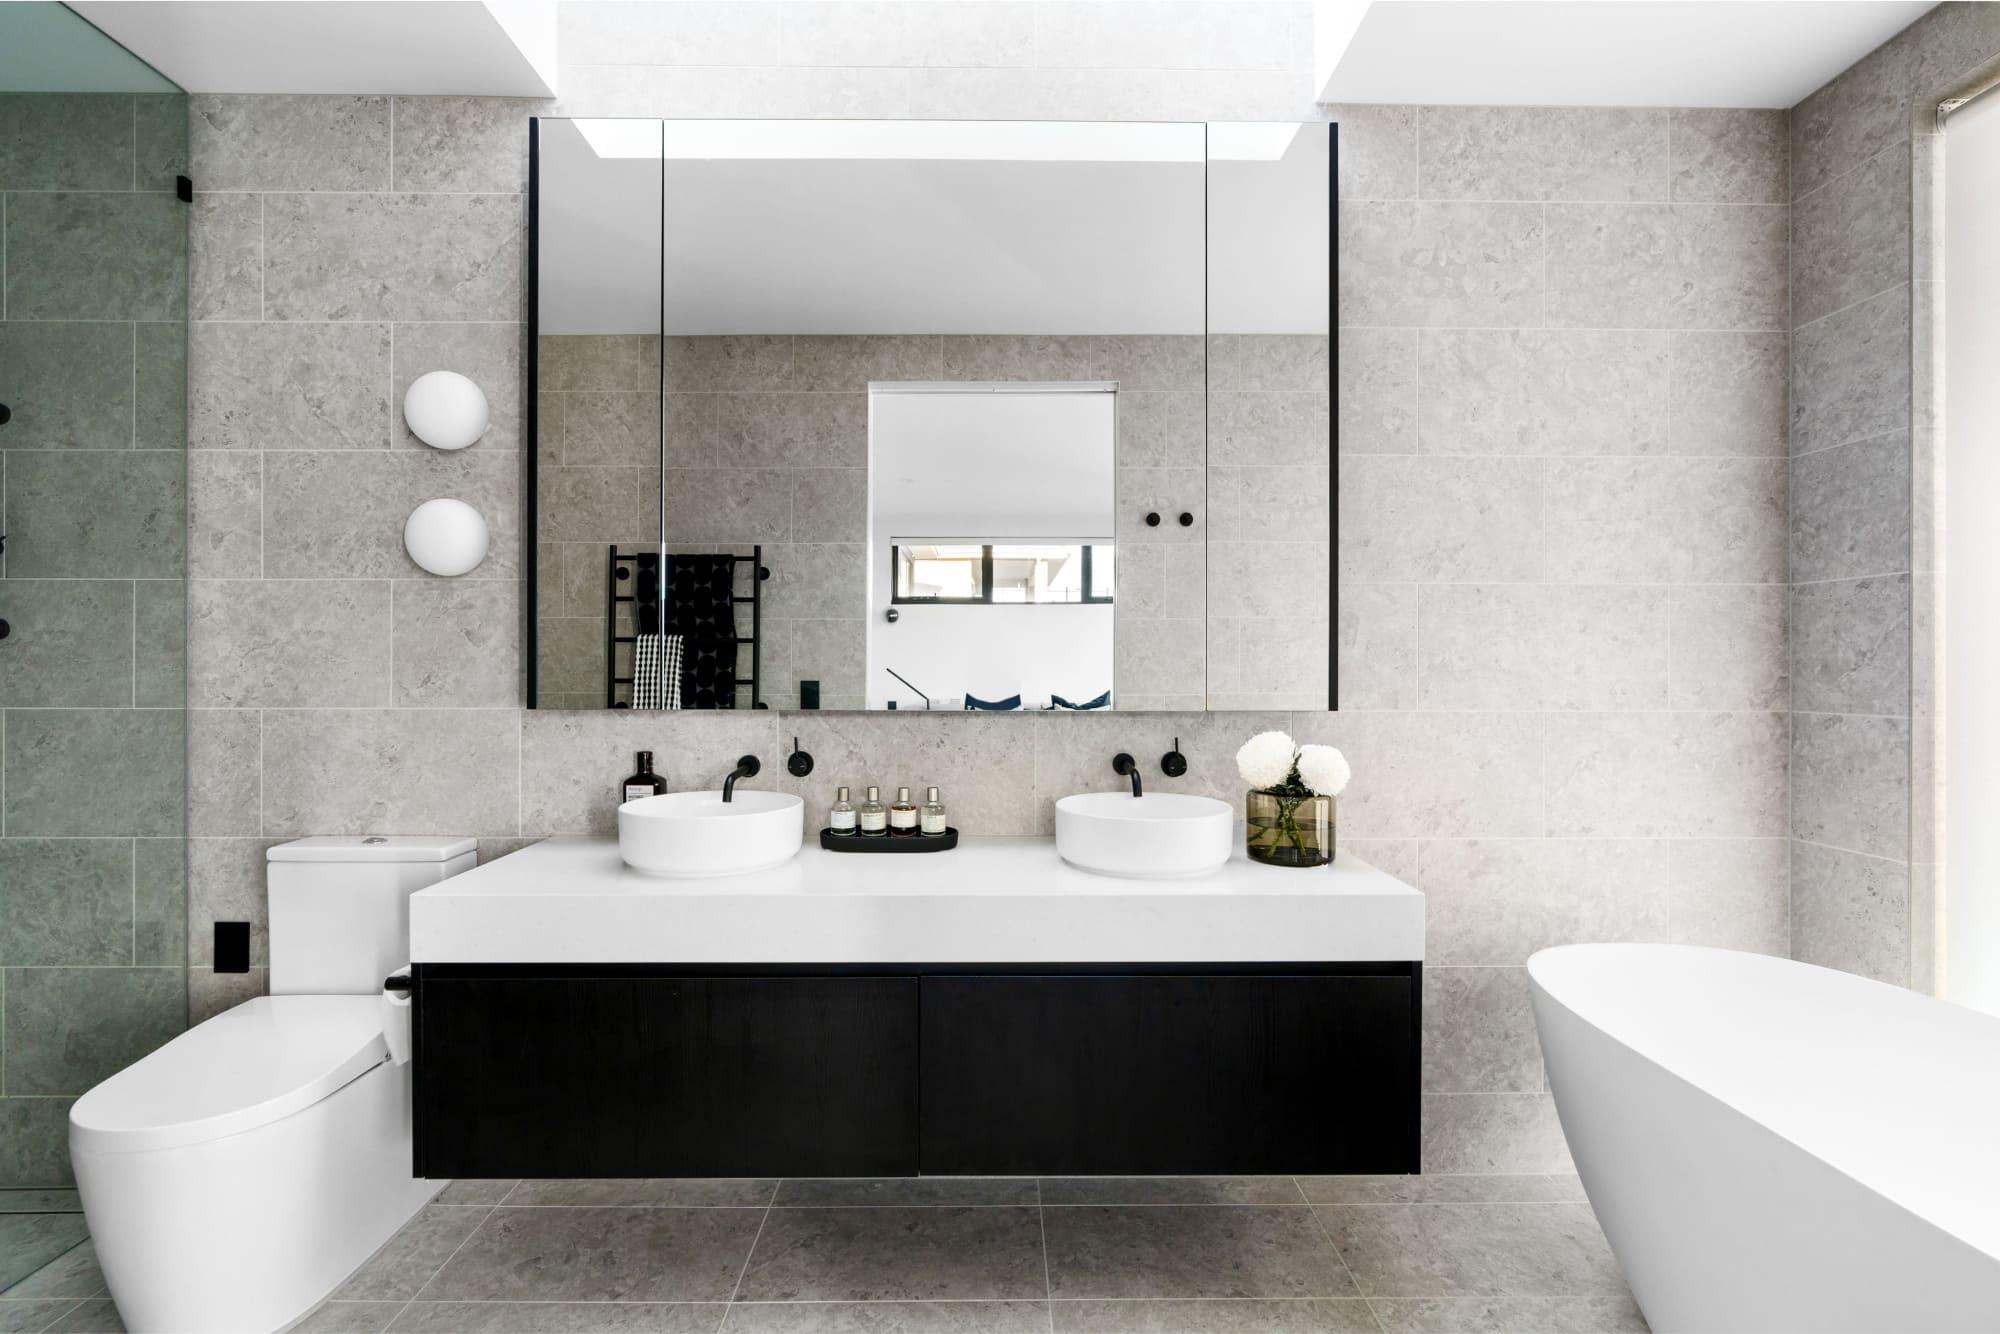 A modern bathroom with large vanity and freestanding bathtub